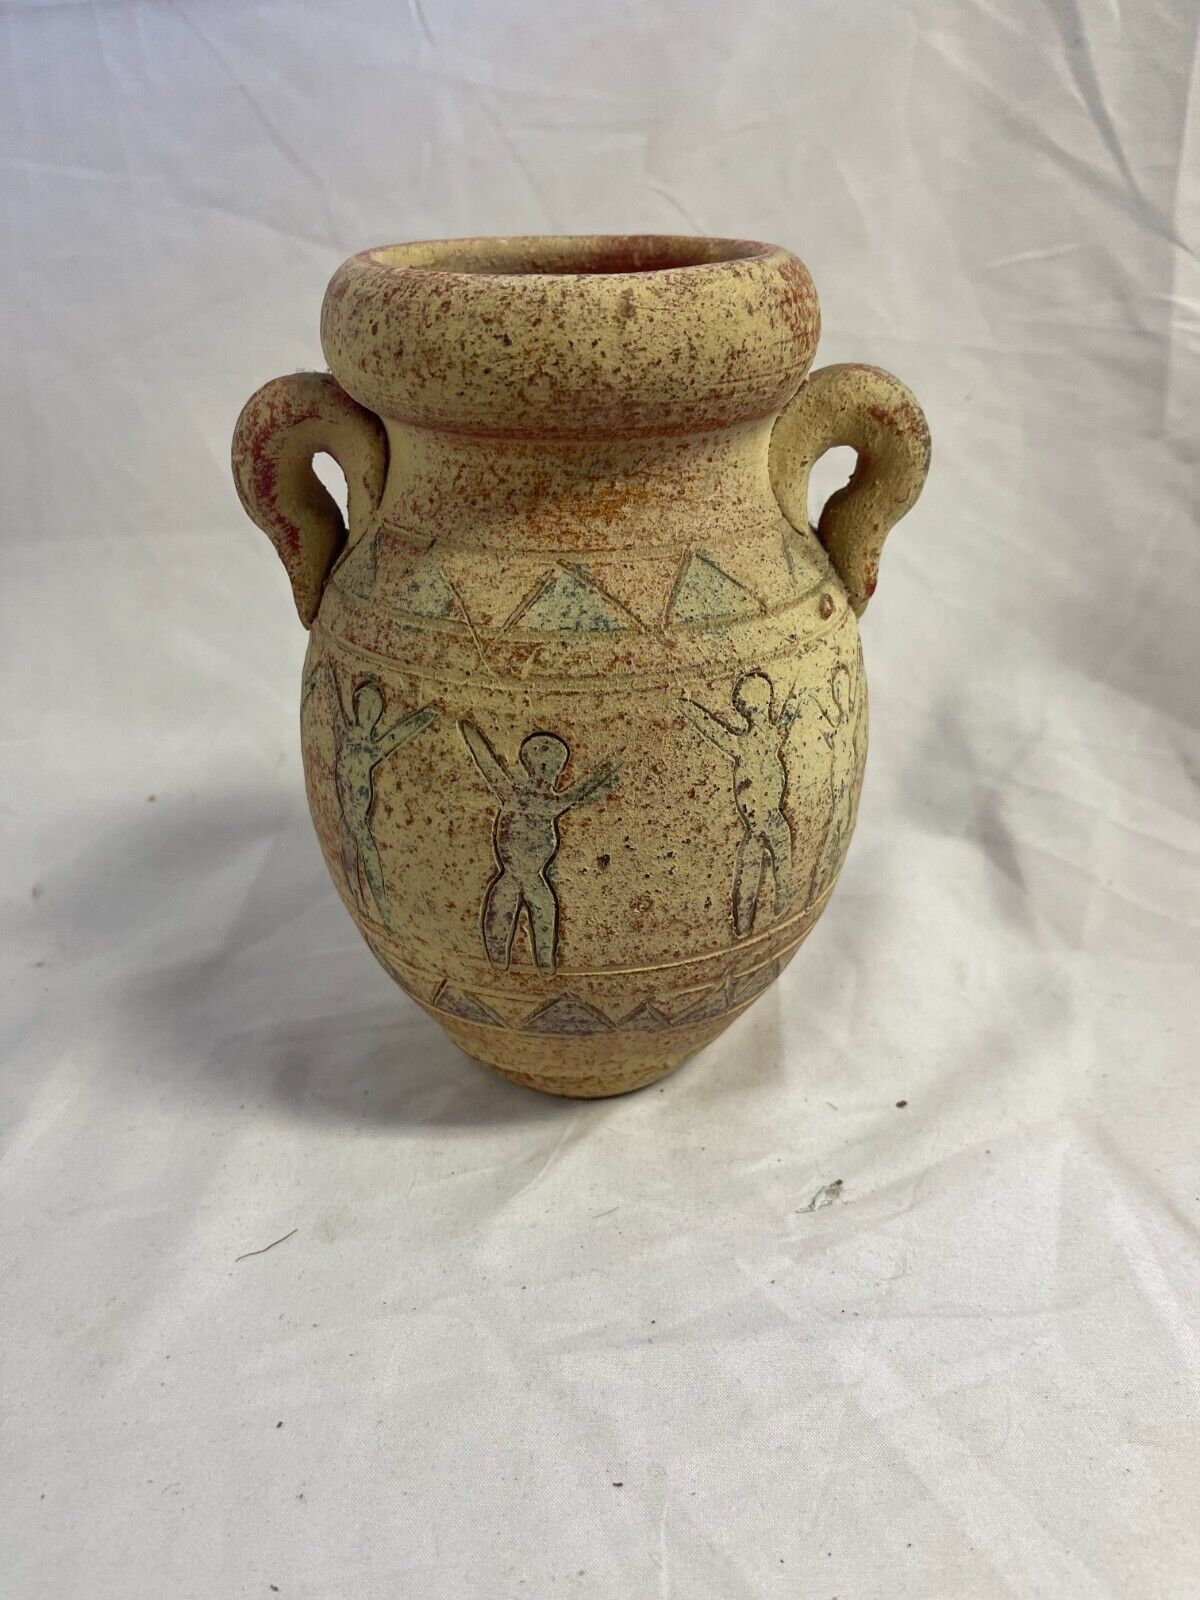 BEAUTIFUL Jug or vase Mexico or new mexico Rustic Clay Mayan Sculpted rare 